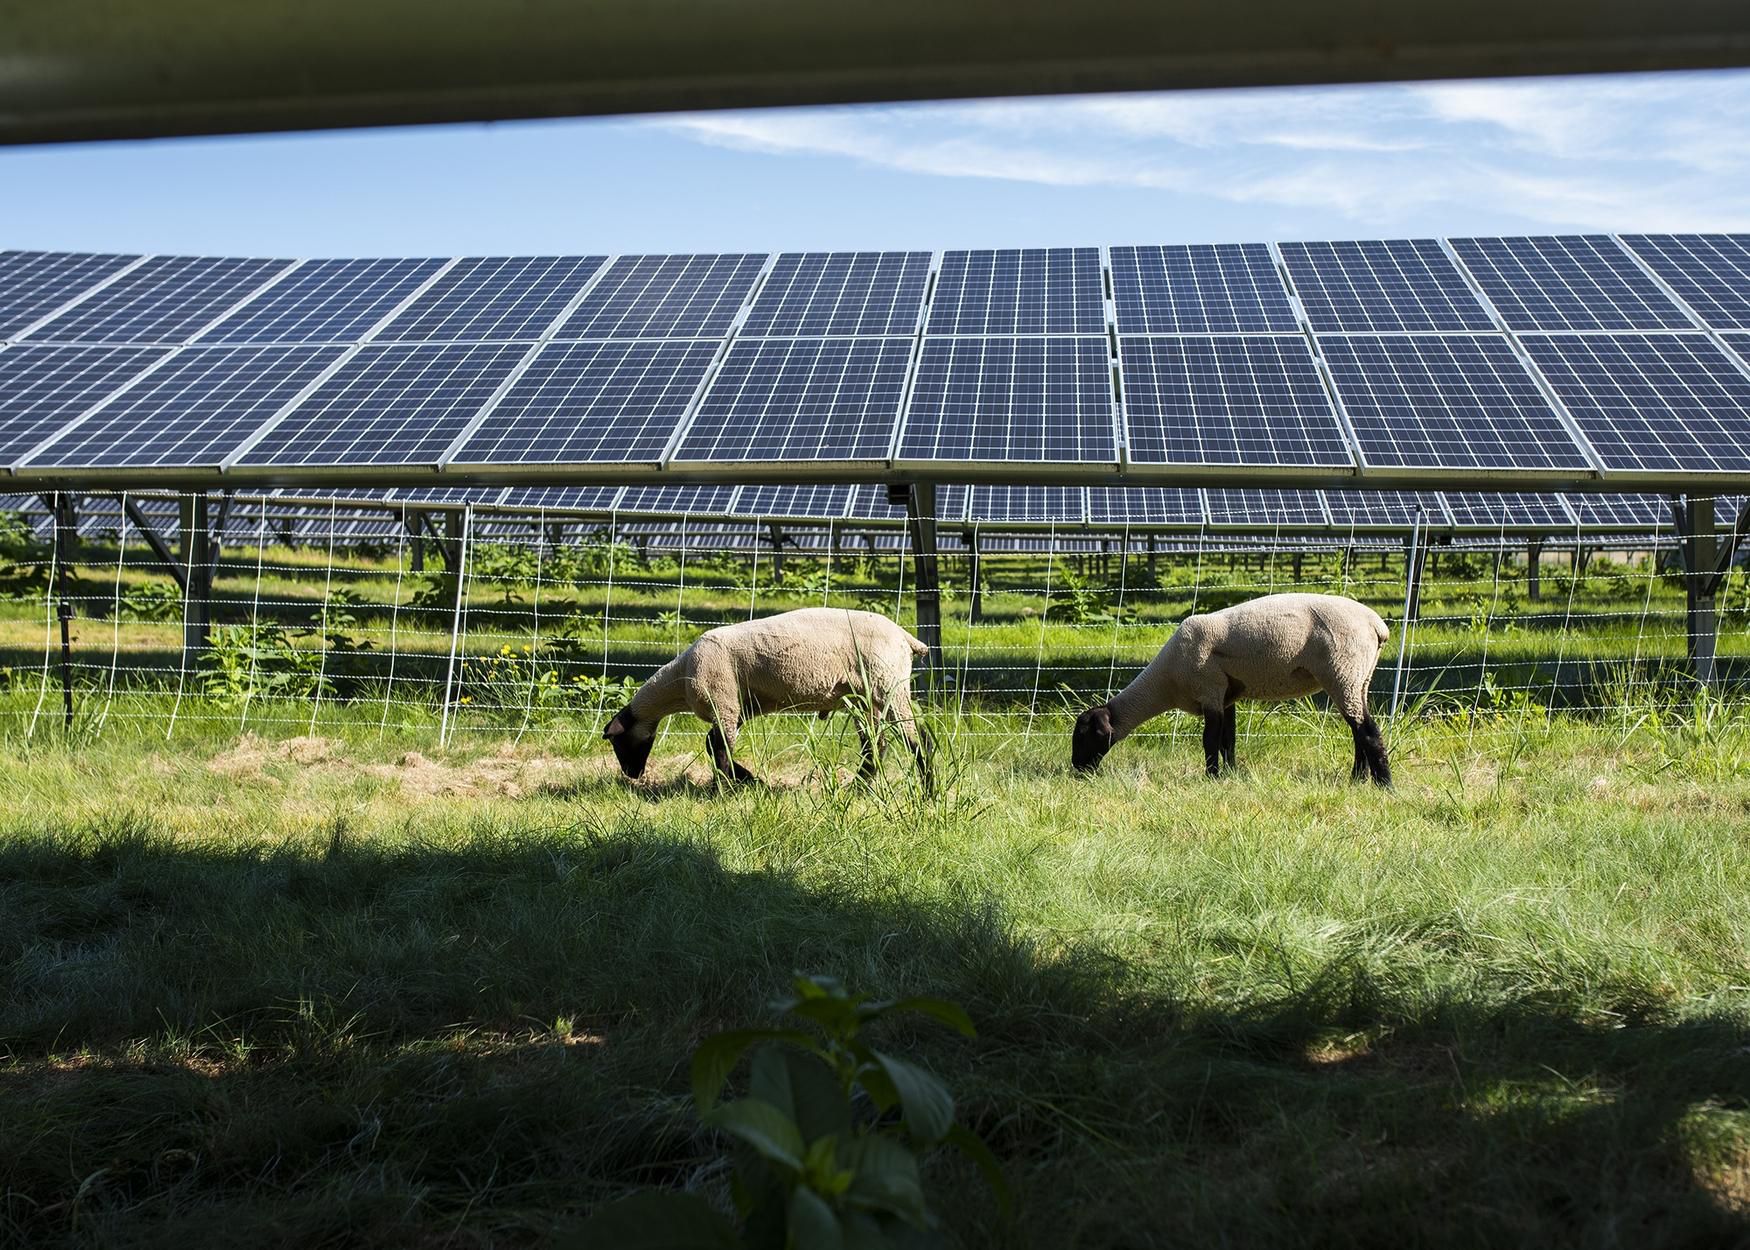 Sheep graze among the solar panels at Mendon Community Solar Farm, managing the site&apos;s vegetation in lieu of a traditional mowing system on Thursday. [T&G Staff/Ashley Green]